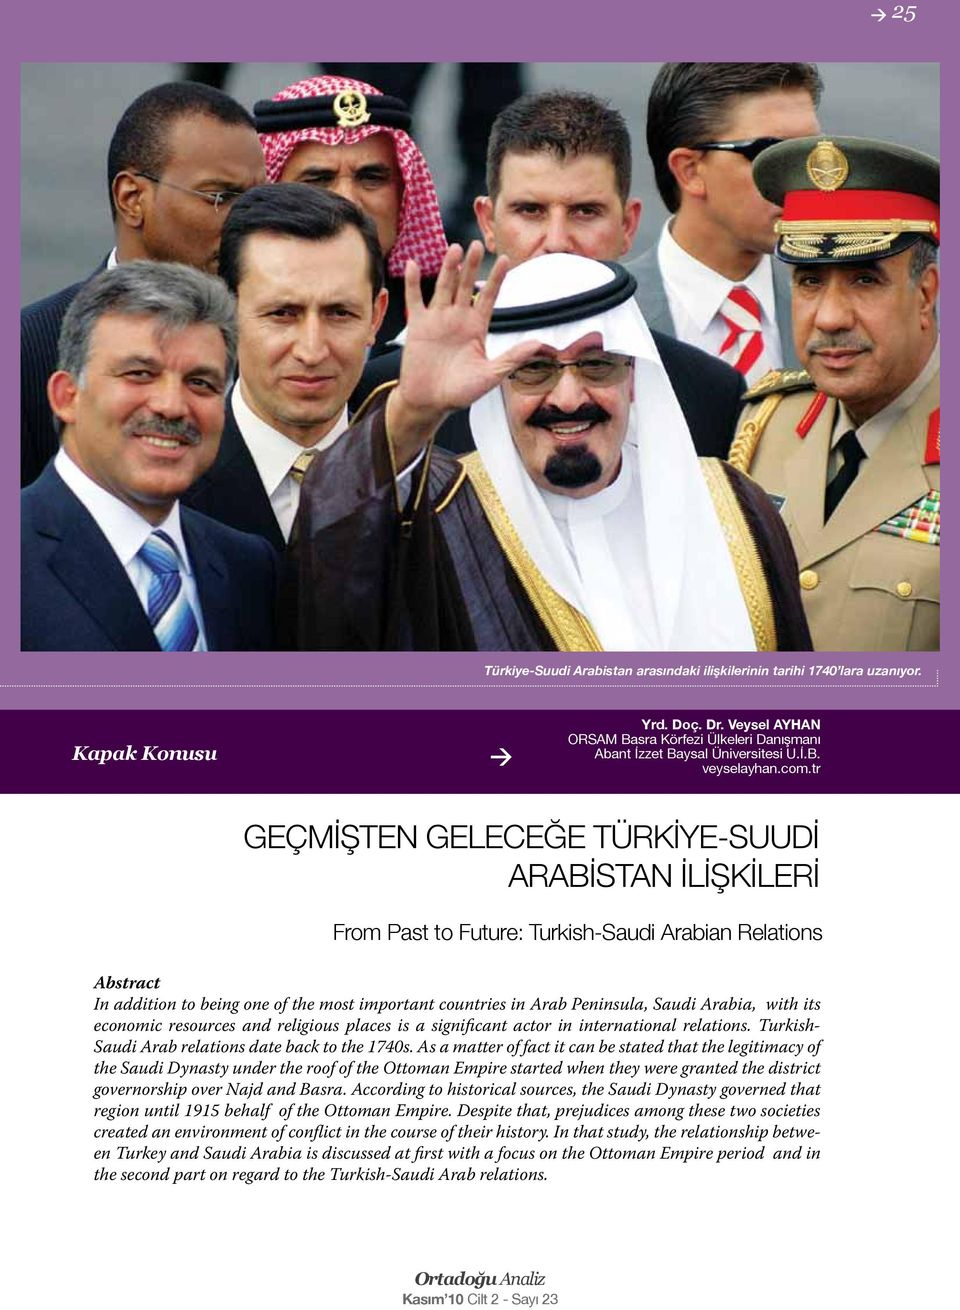 Saudi Arabia, with its economic resources and religious places is a significant actor in international relations. Turkish- Saudi Arab relations date back to the 1740s.